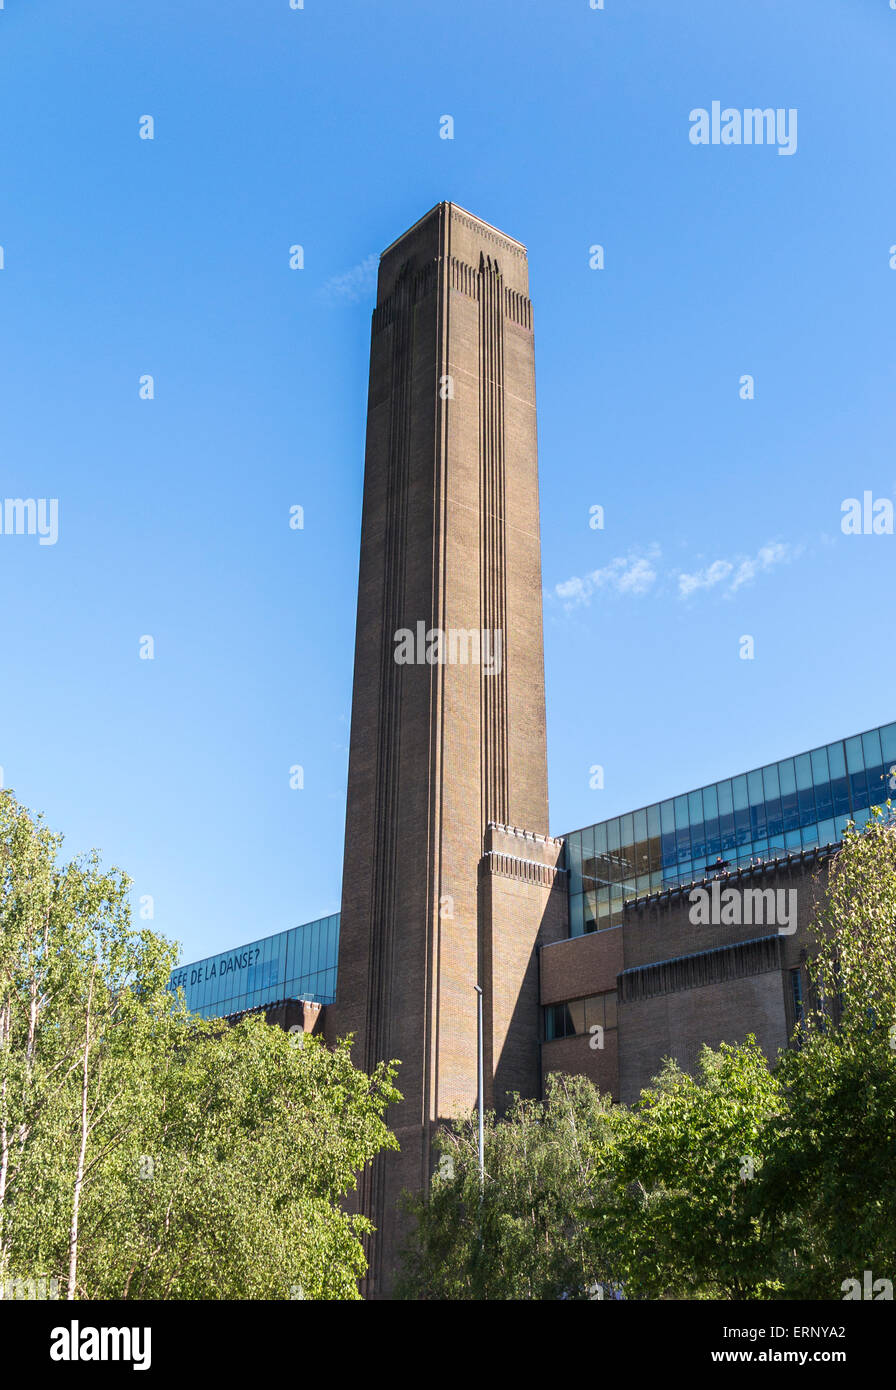 Tall chimney of Tate Modern art gallery, formerly Bankside Power Station, Bankside, London SE1 on a sunny summer's day Stock Photo